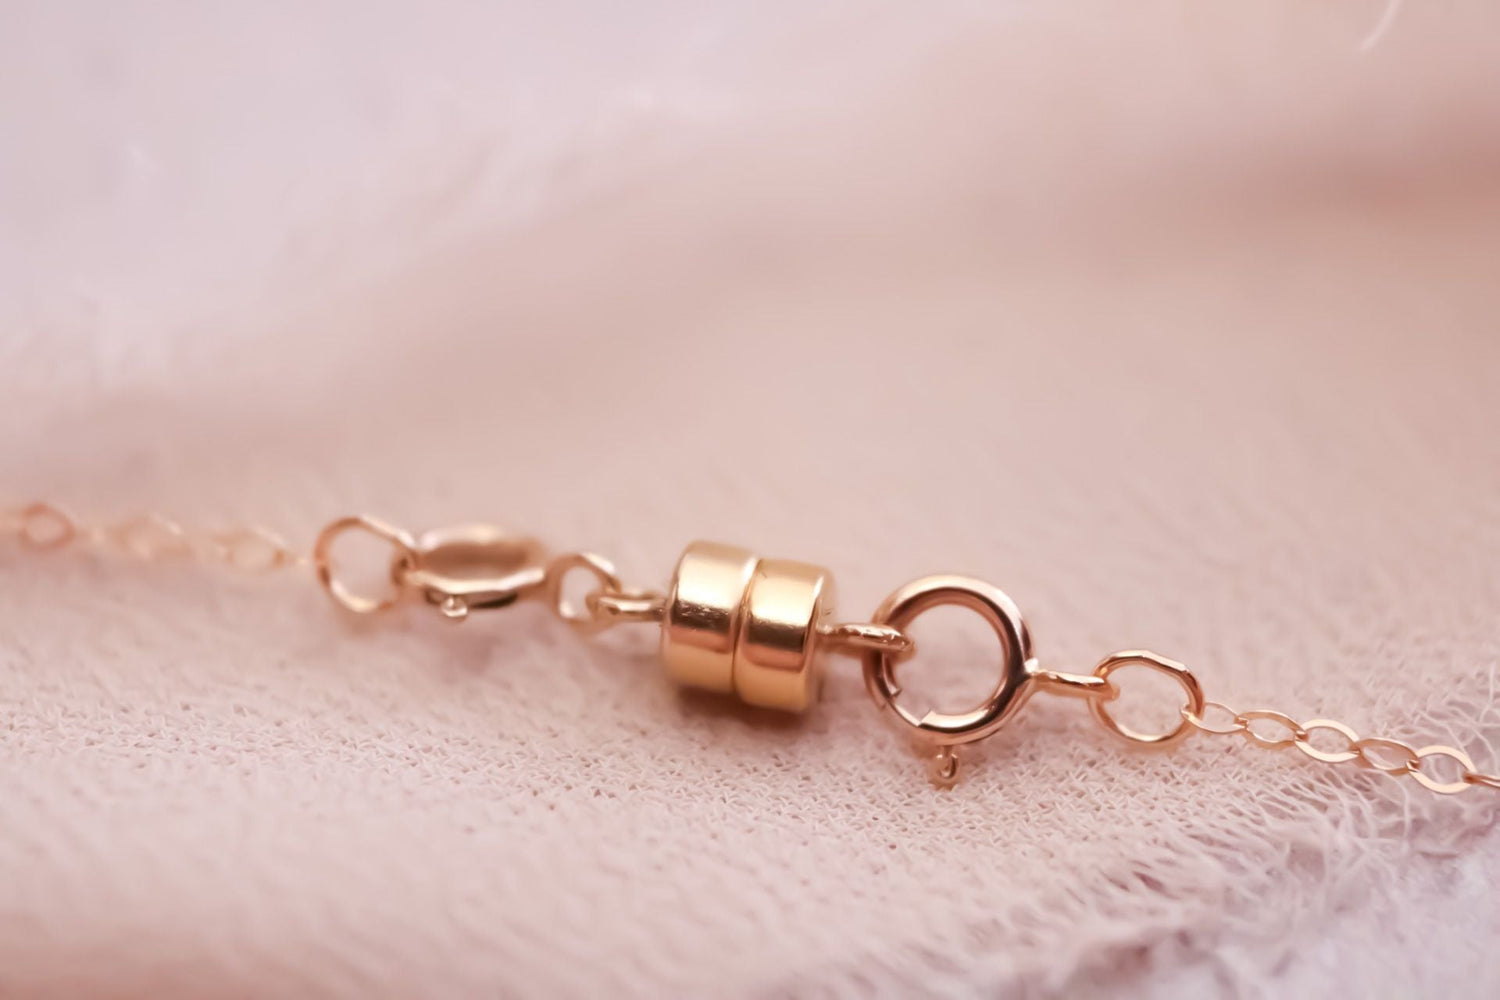 Magnetic Clasp – TickleBugJewelry